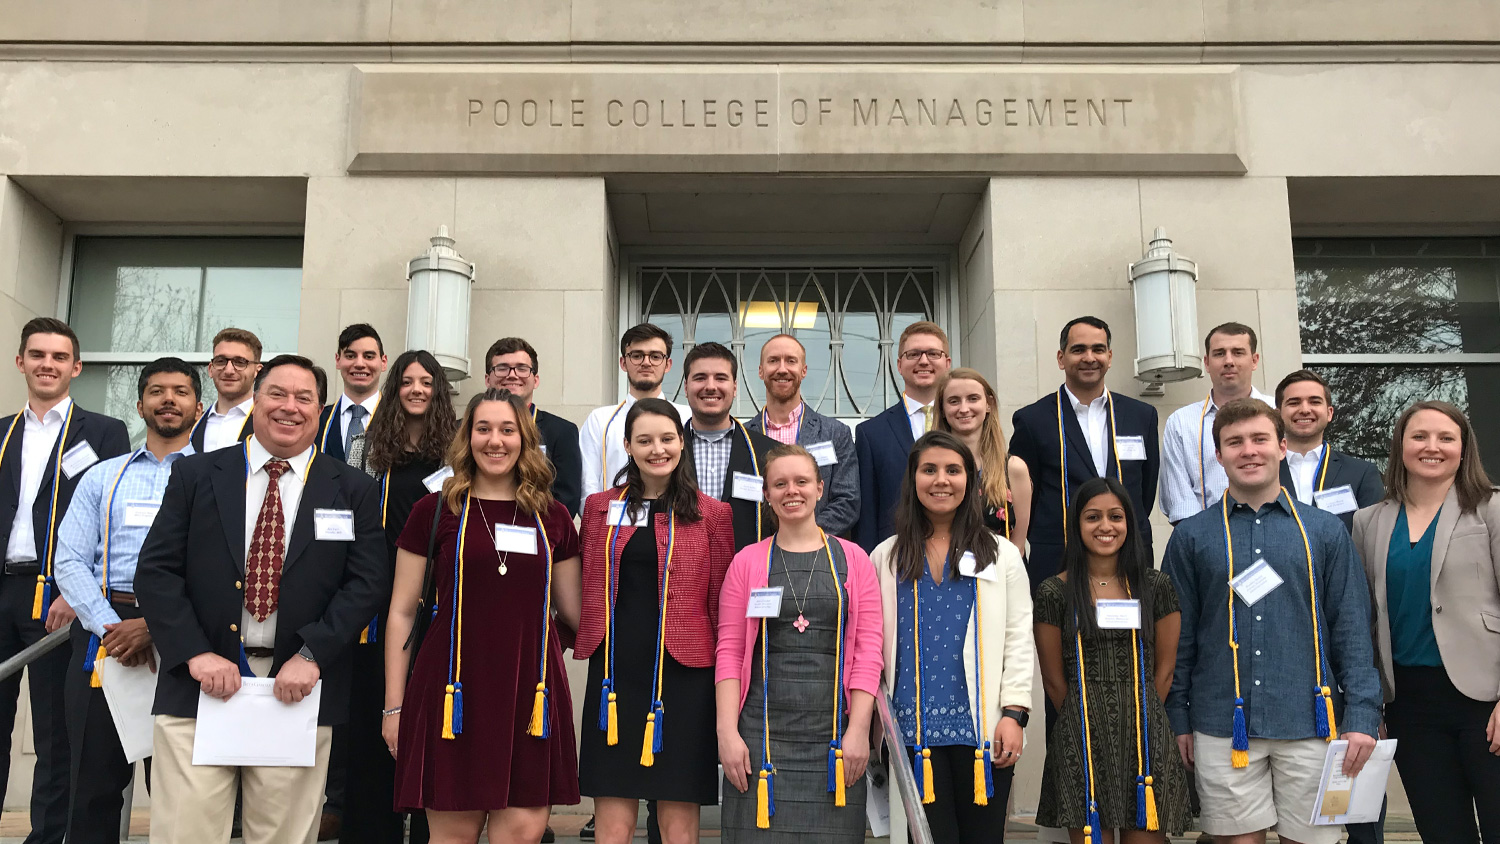 Poole College's 2019 Beta Gamma Sigma inductees who were able to attend the ceremony, gather for photo at the college's front stairs.